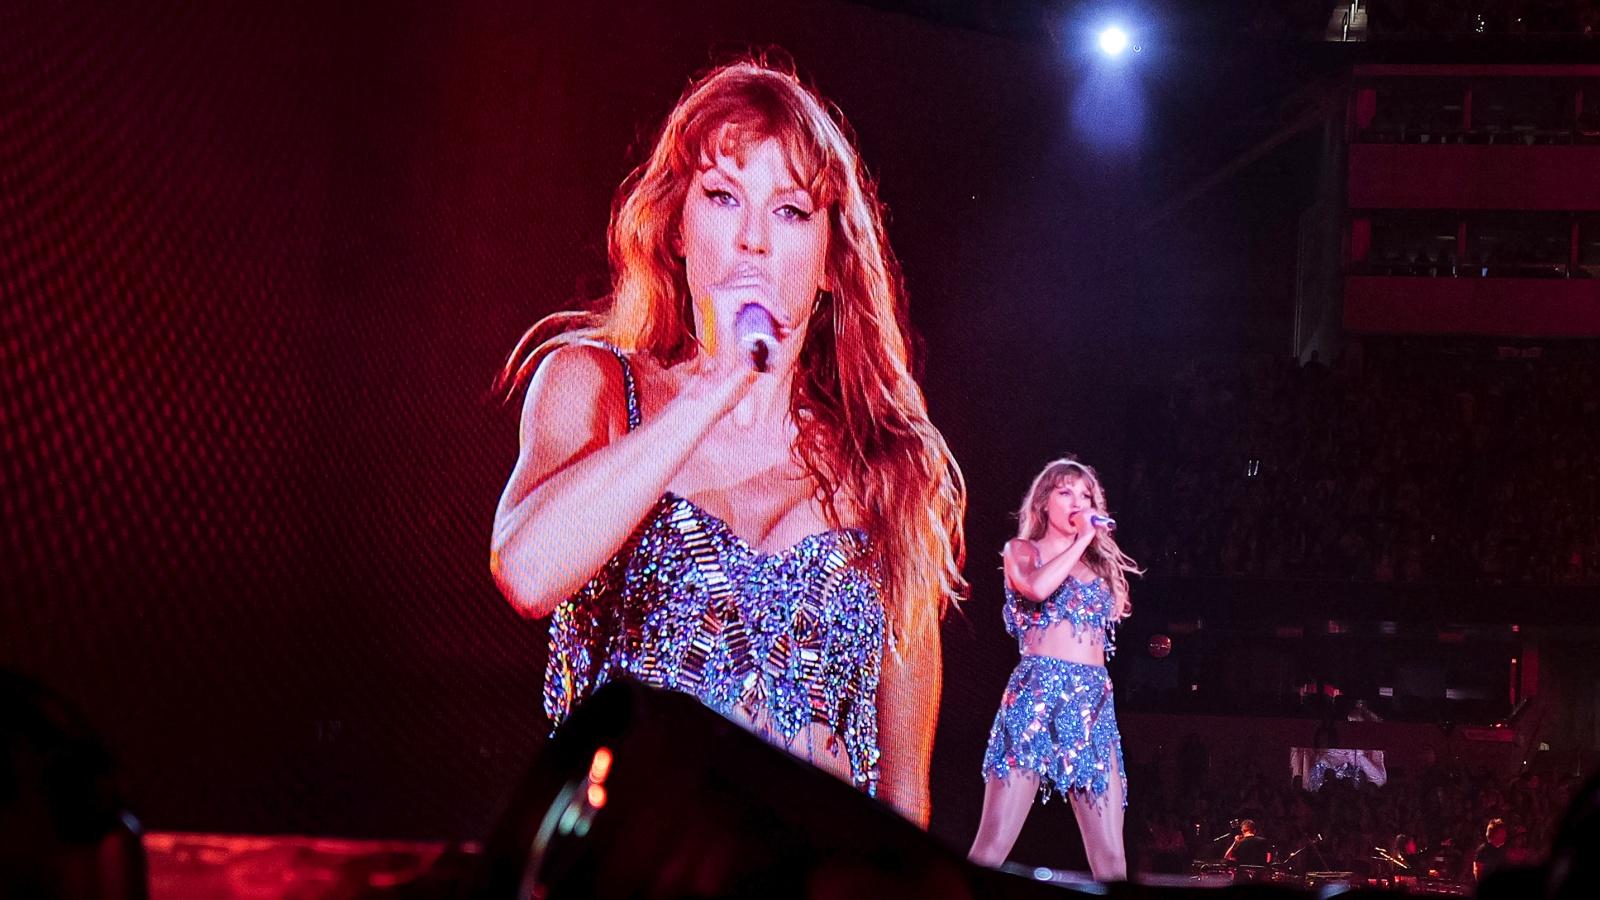 Taylor Swift performing onstage at a concert